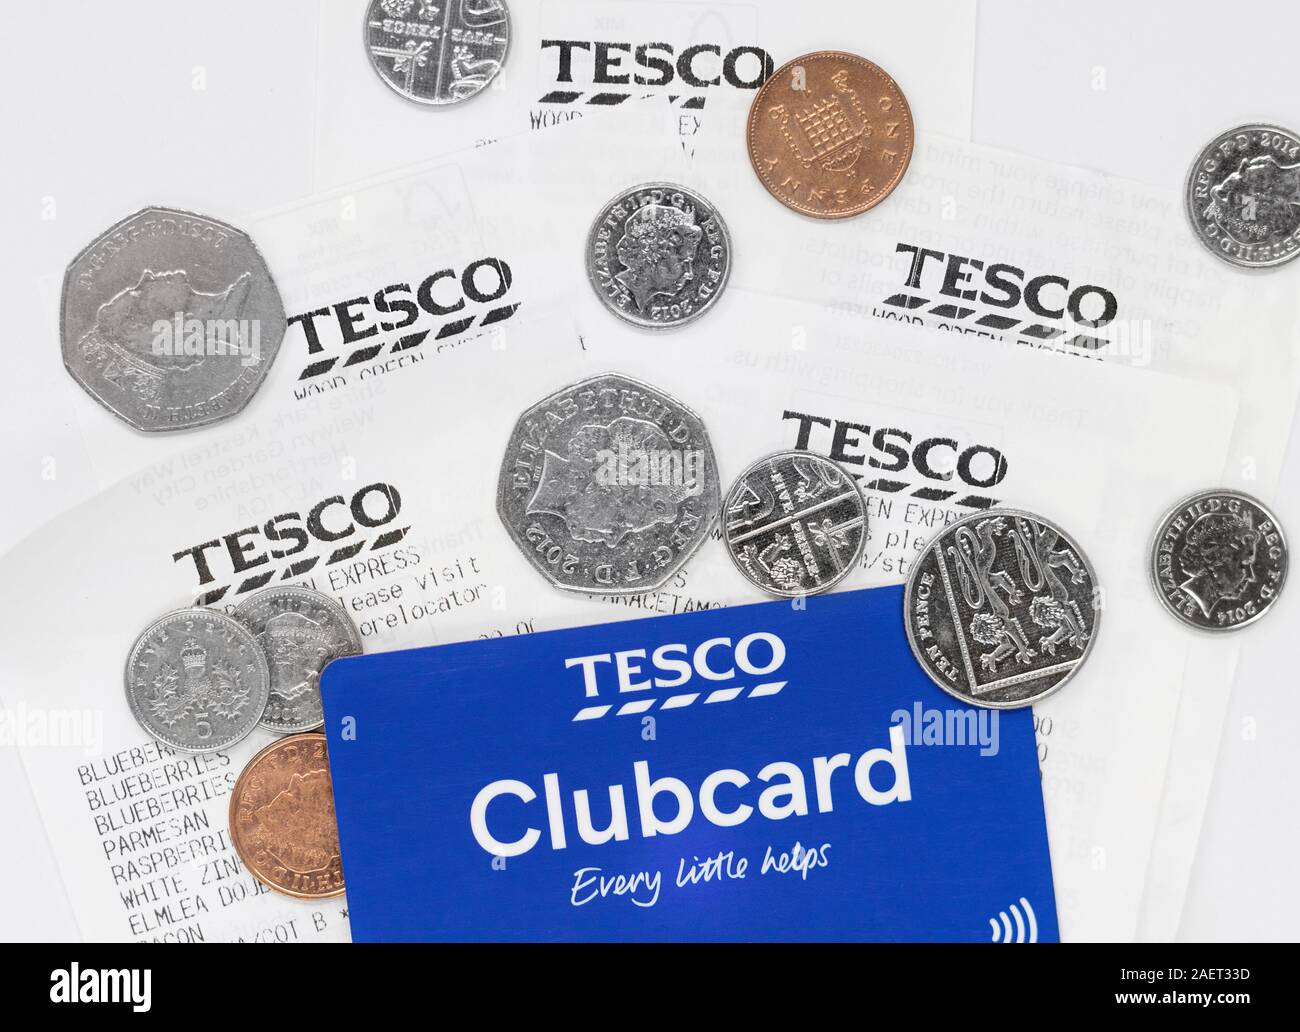 London, UK - December 10th 2019 - Contactless Tesco loyalty card, receipts and money isolated on a white background Stock Photo